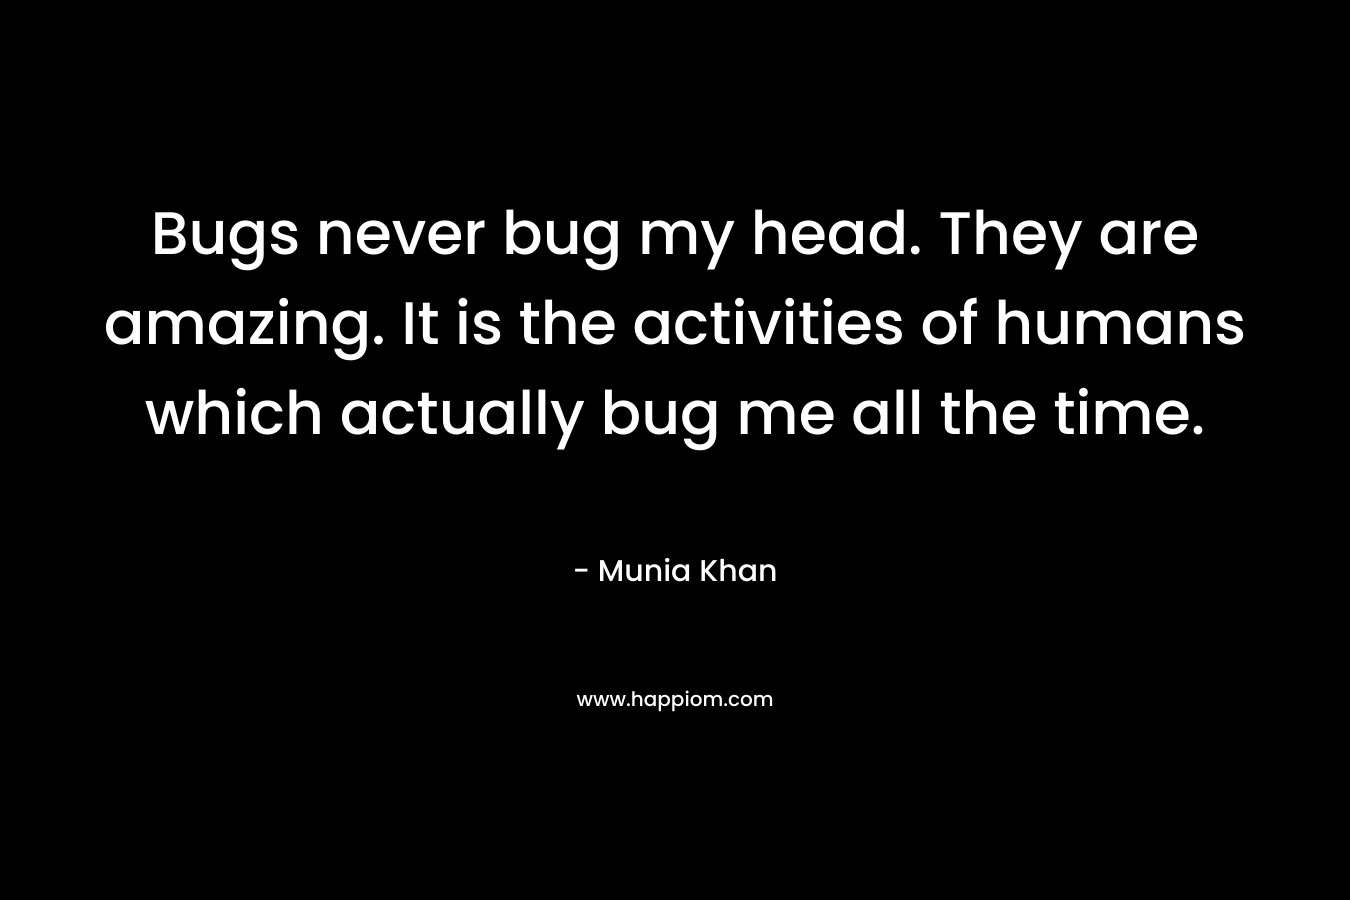 Bugs never bug my head. They are amazing. It is the activities of humans which actually bug me all the time.